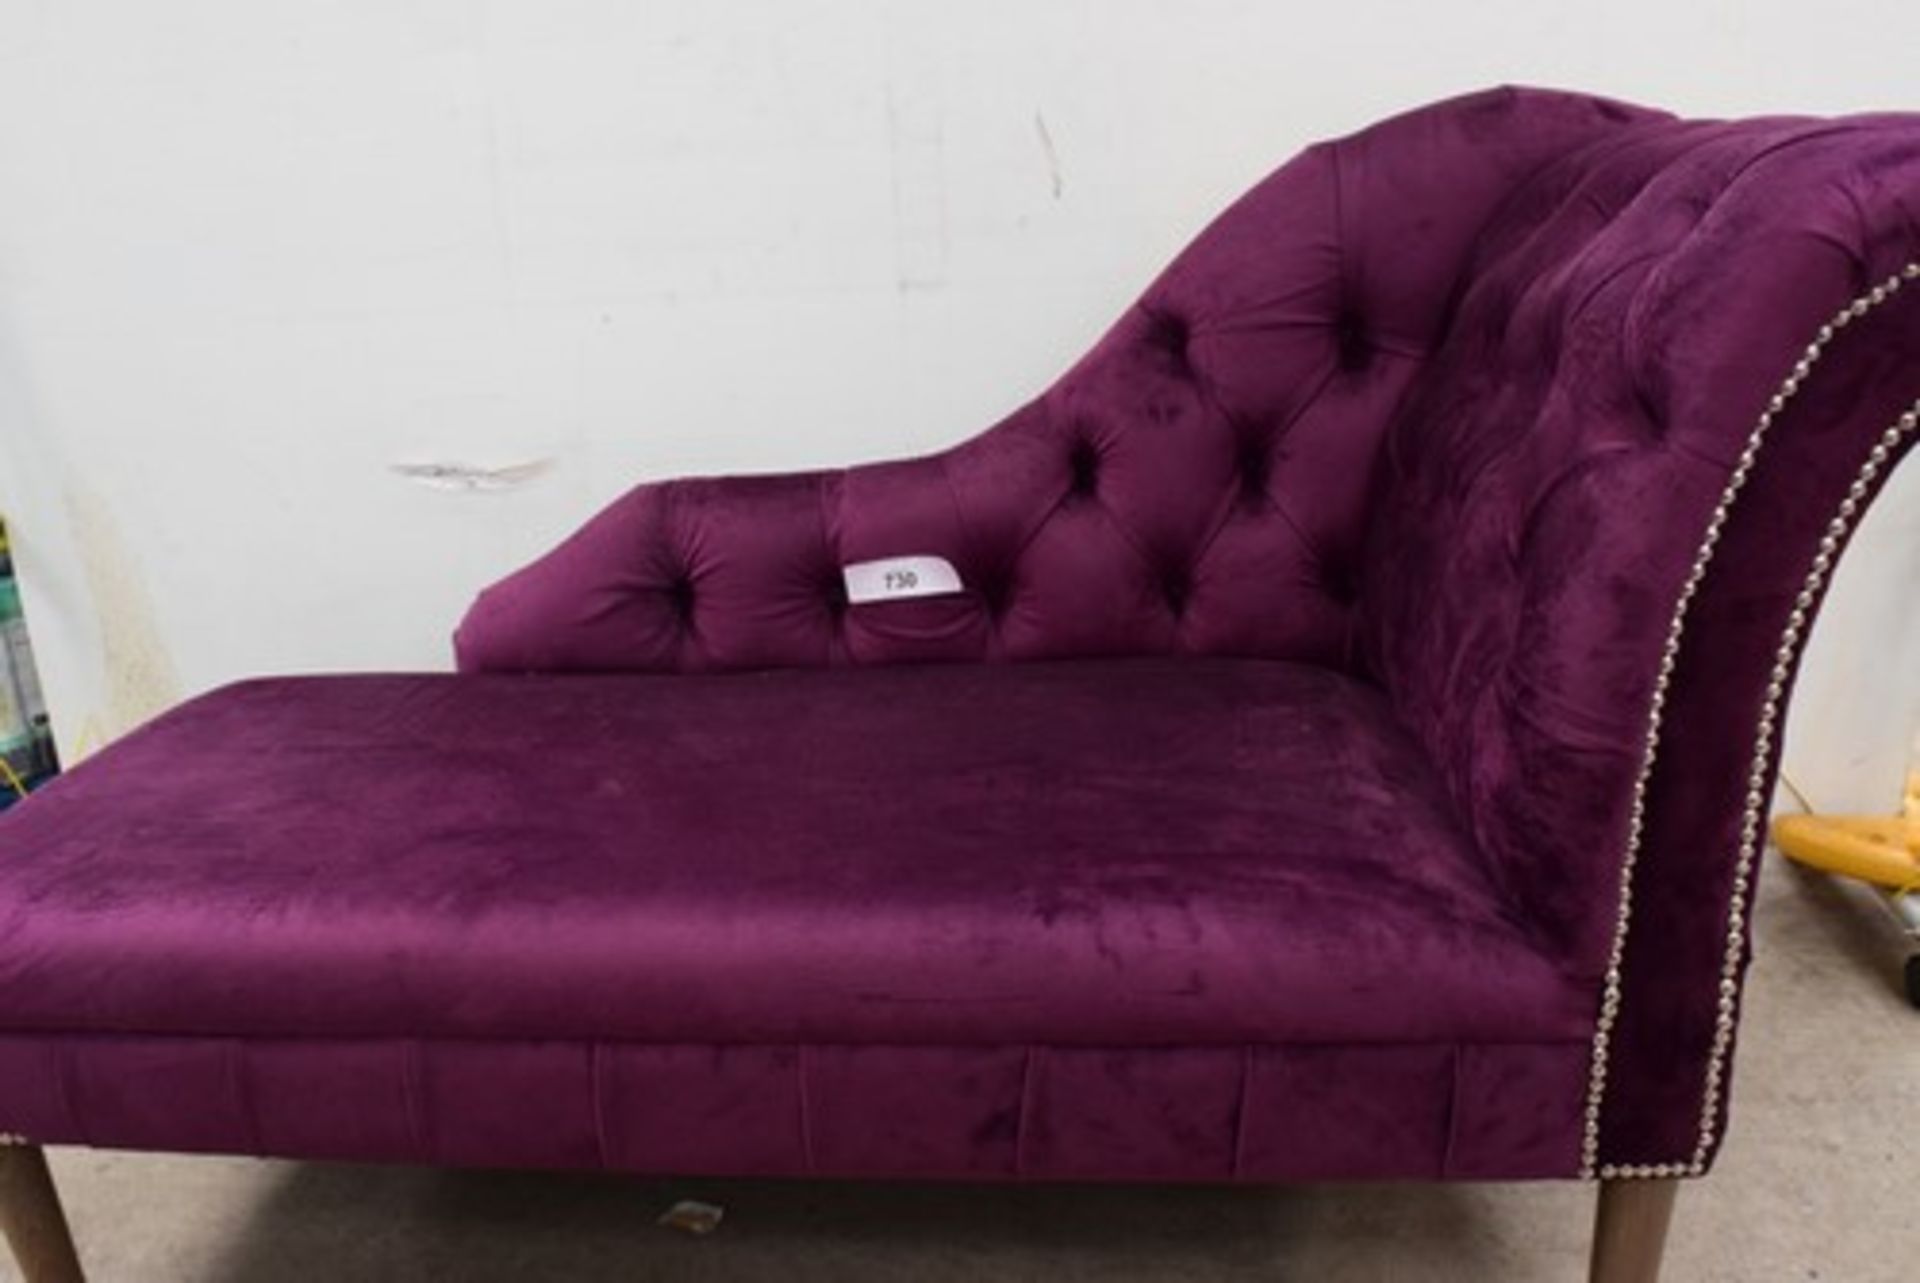 1 x Chaise lounge, purple approximately 140 x 55cm (slight tear in fabric front left corner) - Image 2 of 6